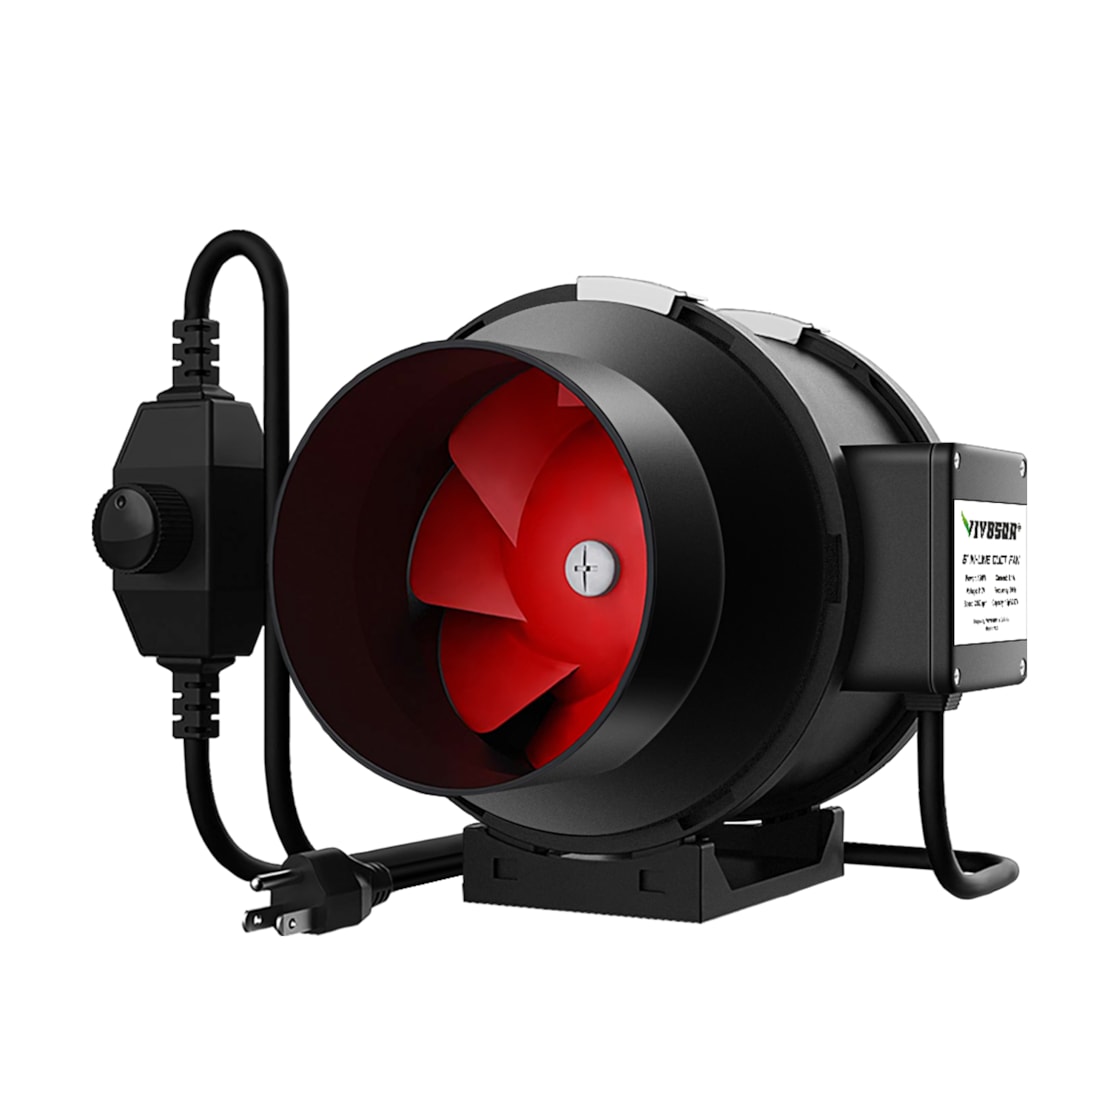 VIVOSUN 6-Inch 390 CFM Inline Duct Fan with Variable Speed Controller